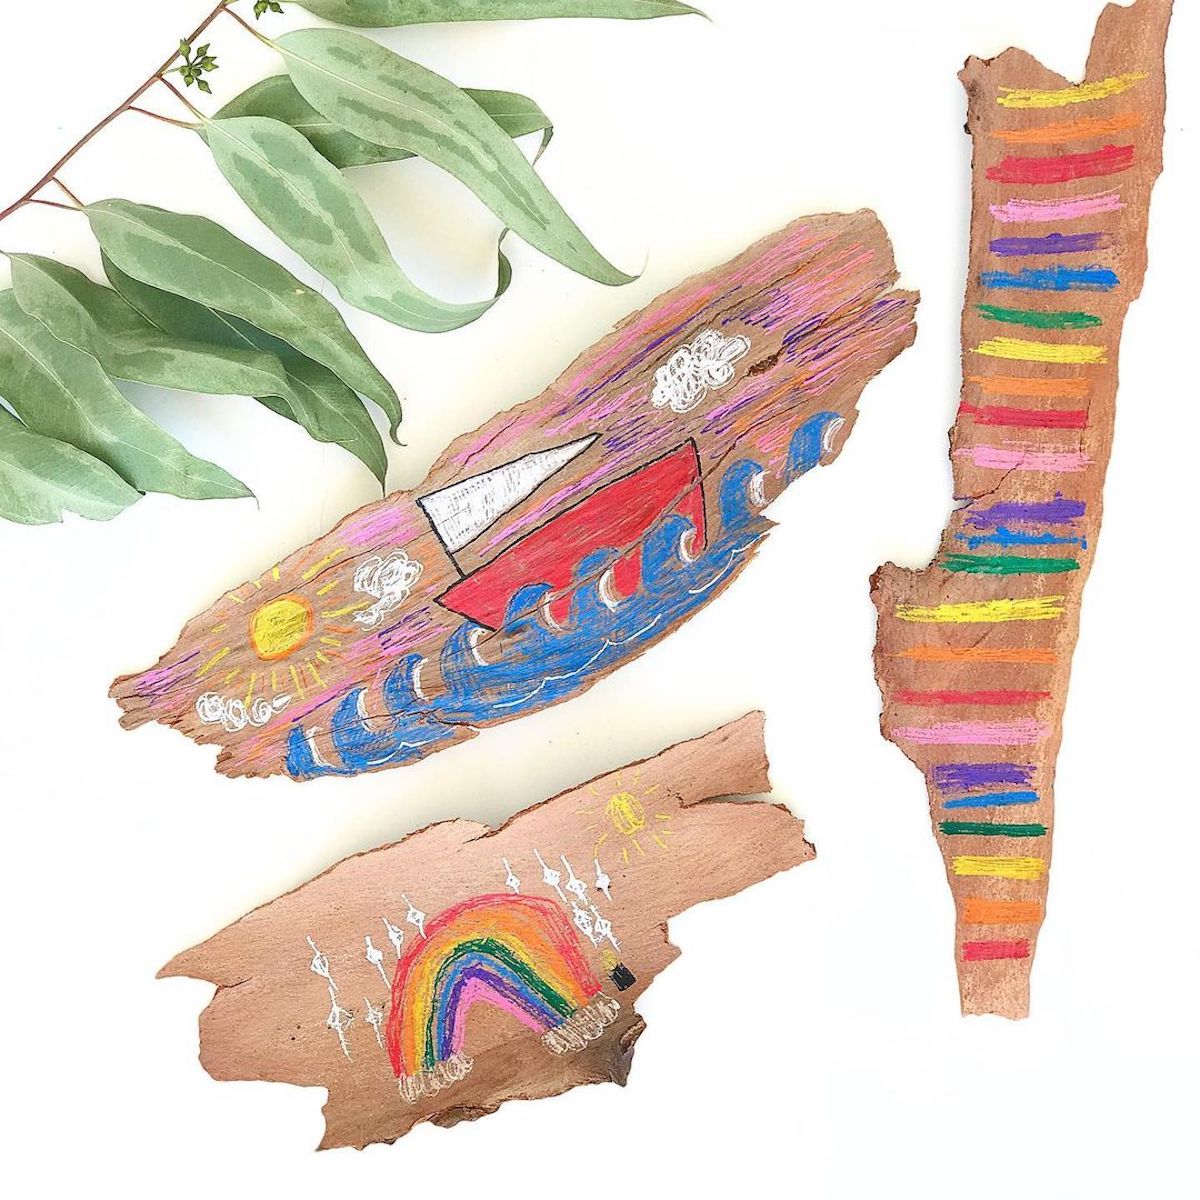 This tree bark canvas activity makes a fun craft for kids